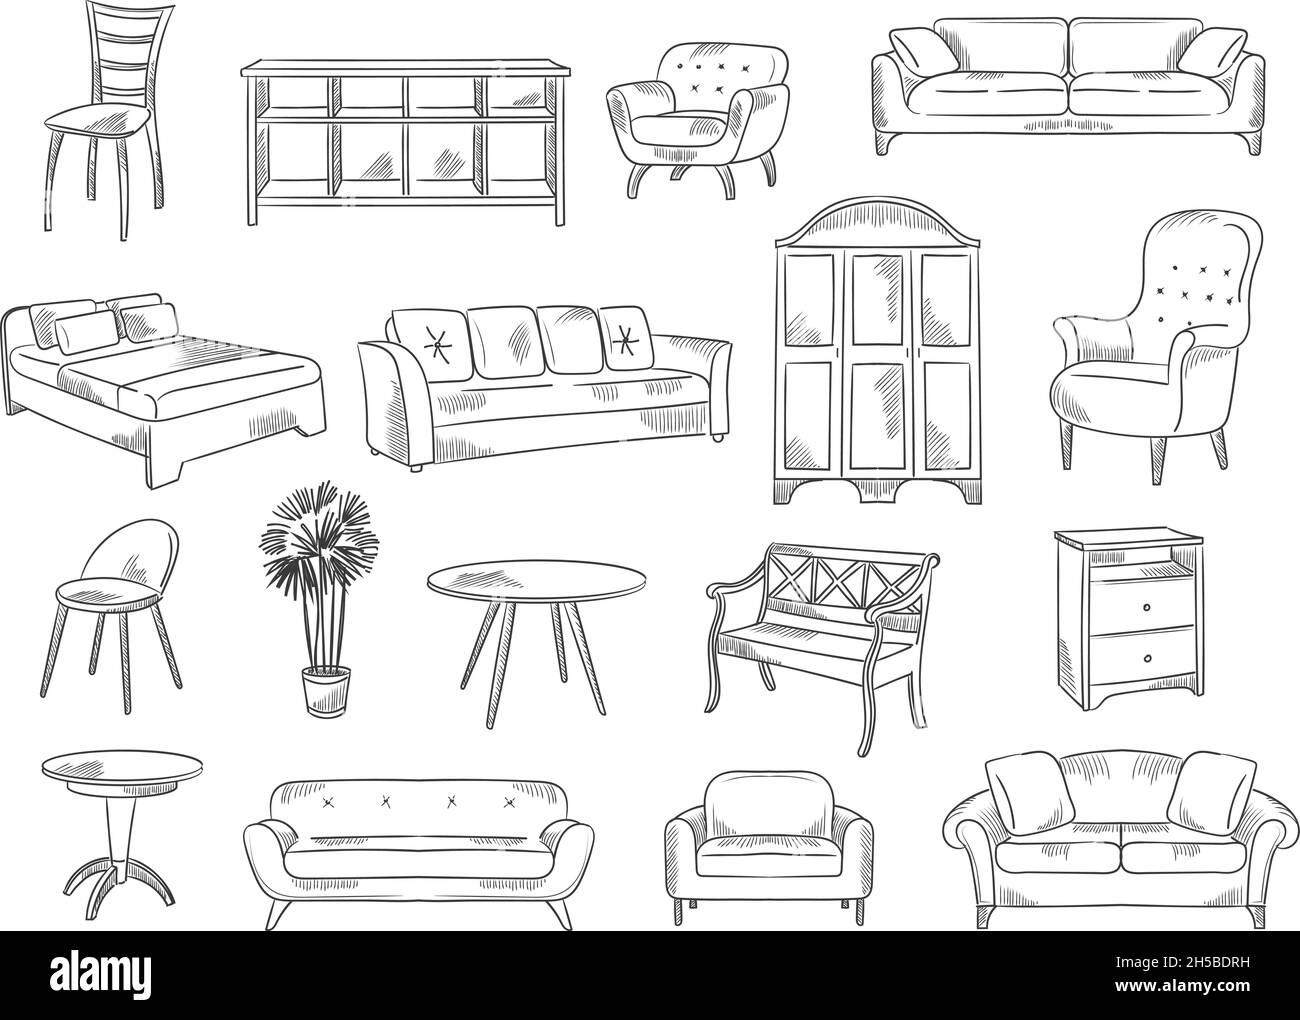 Sketches furniture. Modern interior objects chairs beds technical drawings for architectural design projects recent vector illustrations set Stock Vector